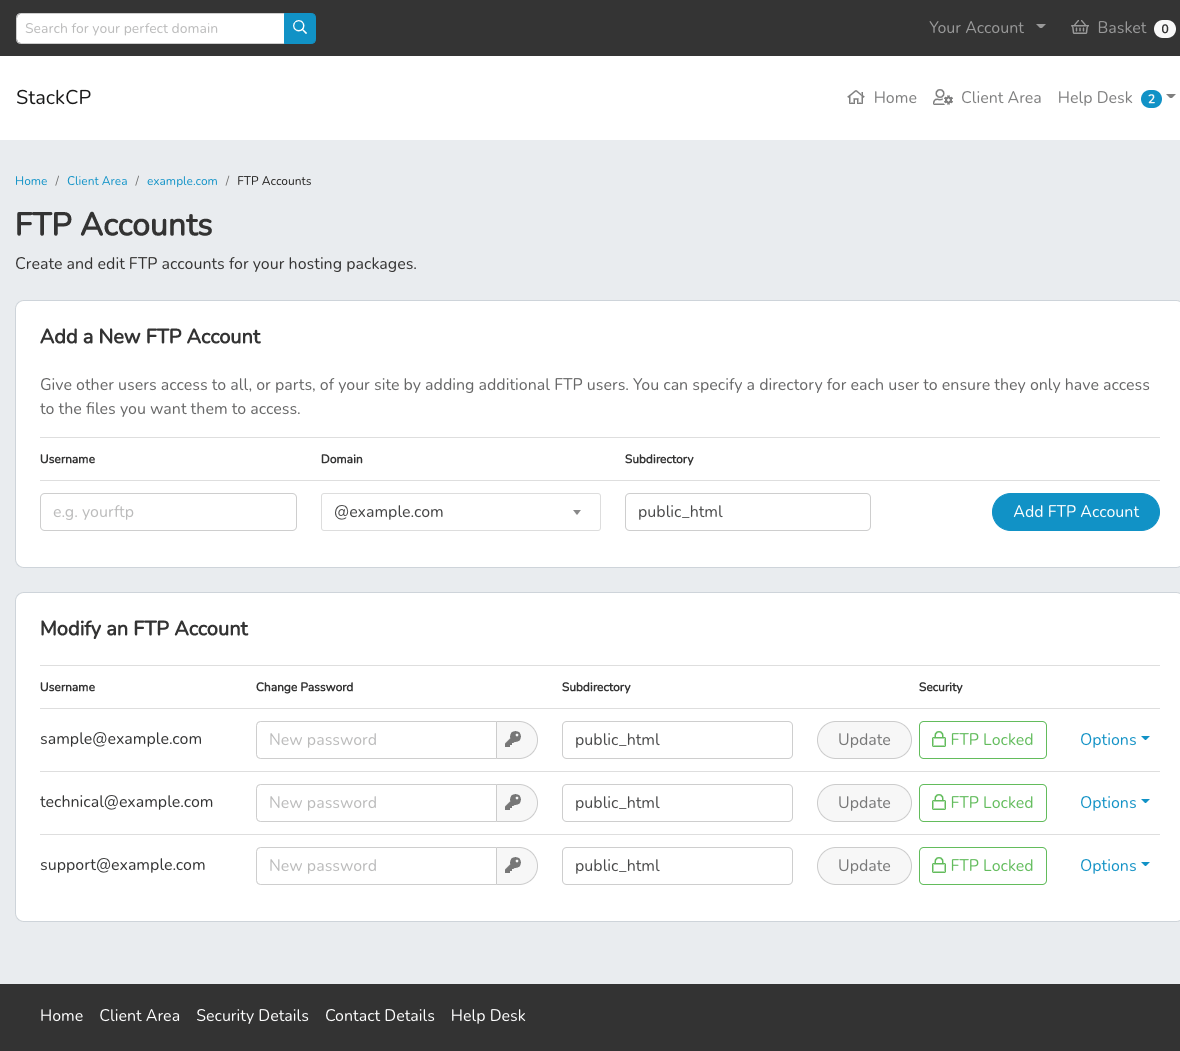 Manage FTP accounts for your customers